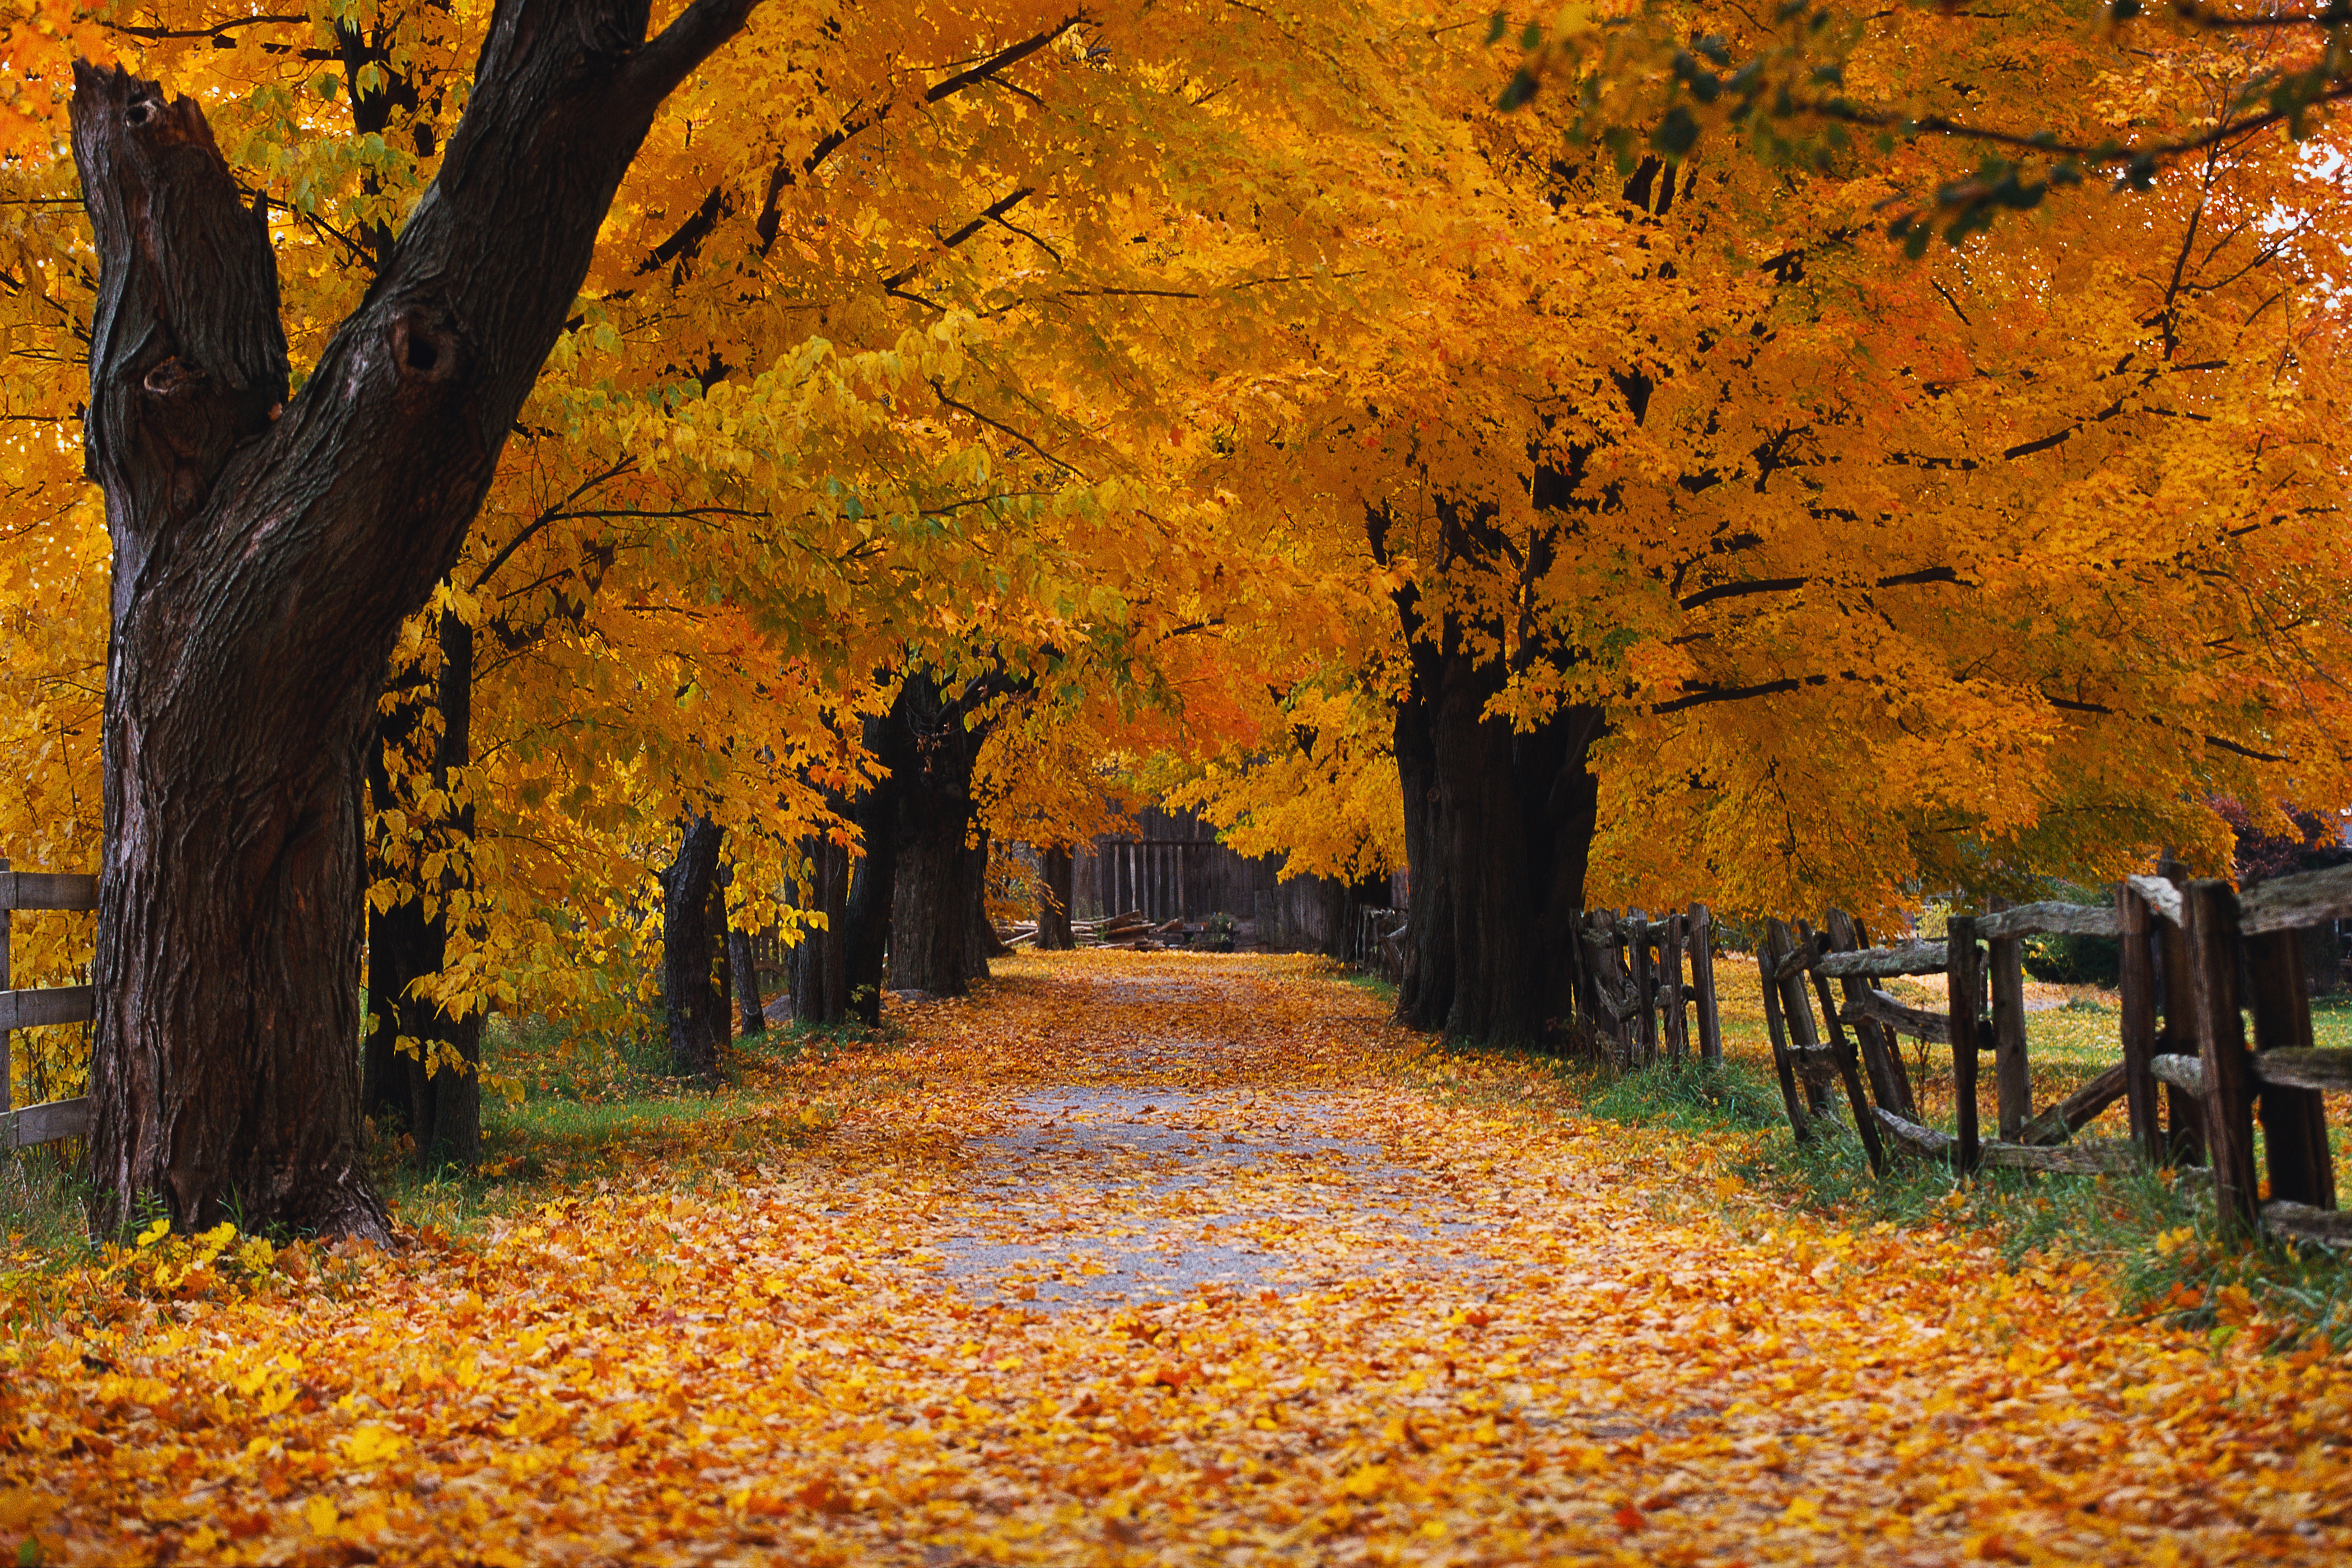 Fall Windows XP Trees Yellow Leaves Road Wood Fence Leaves 4200x2800